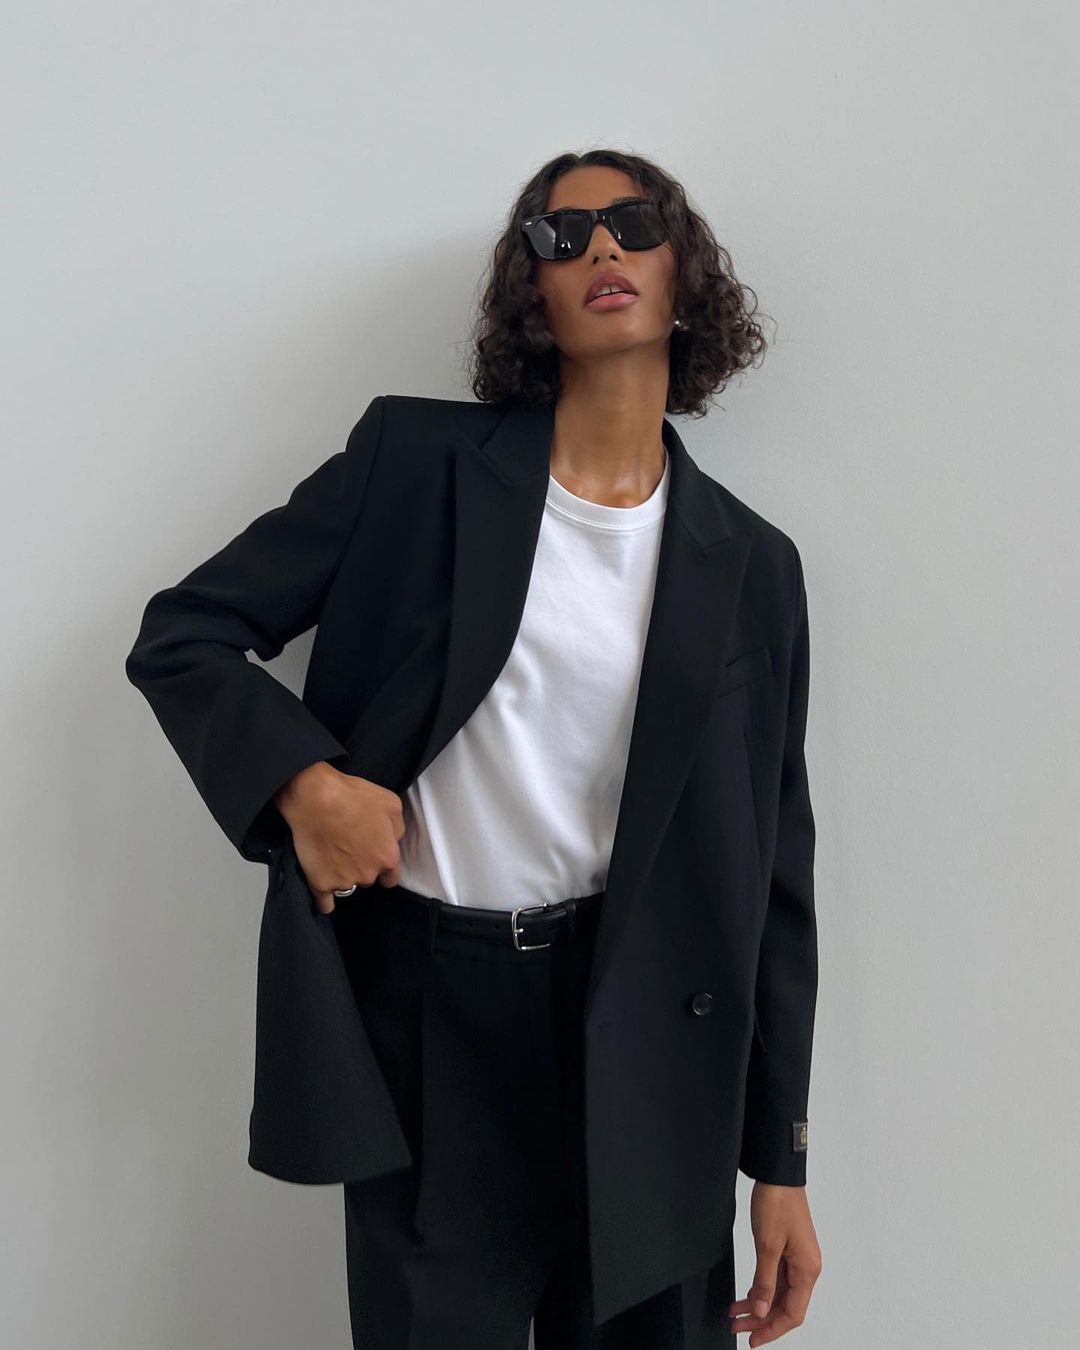 model wearing black blazer and pants, with white shirt and sunglasses